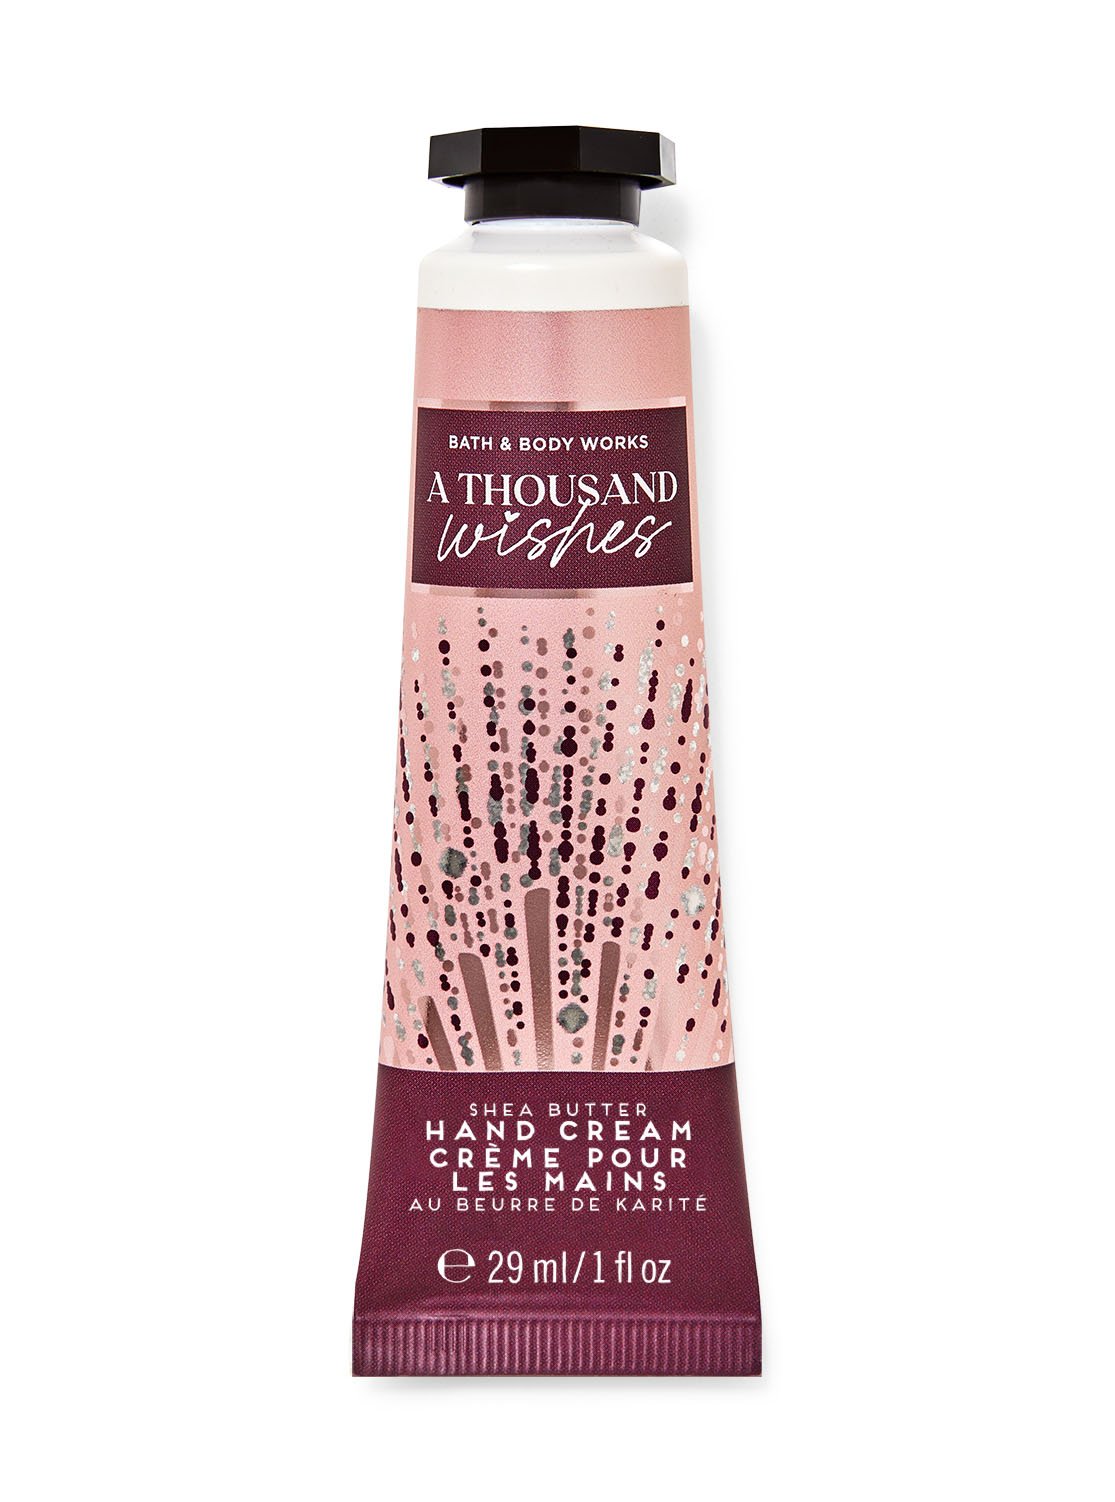 A Thousand Wishes Hand Cream | Bath and Body Works